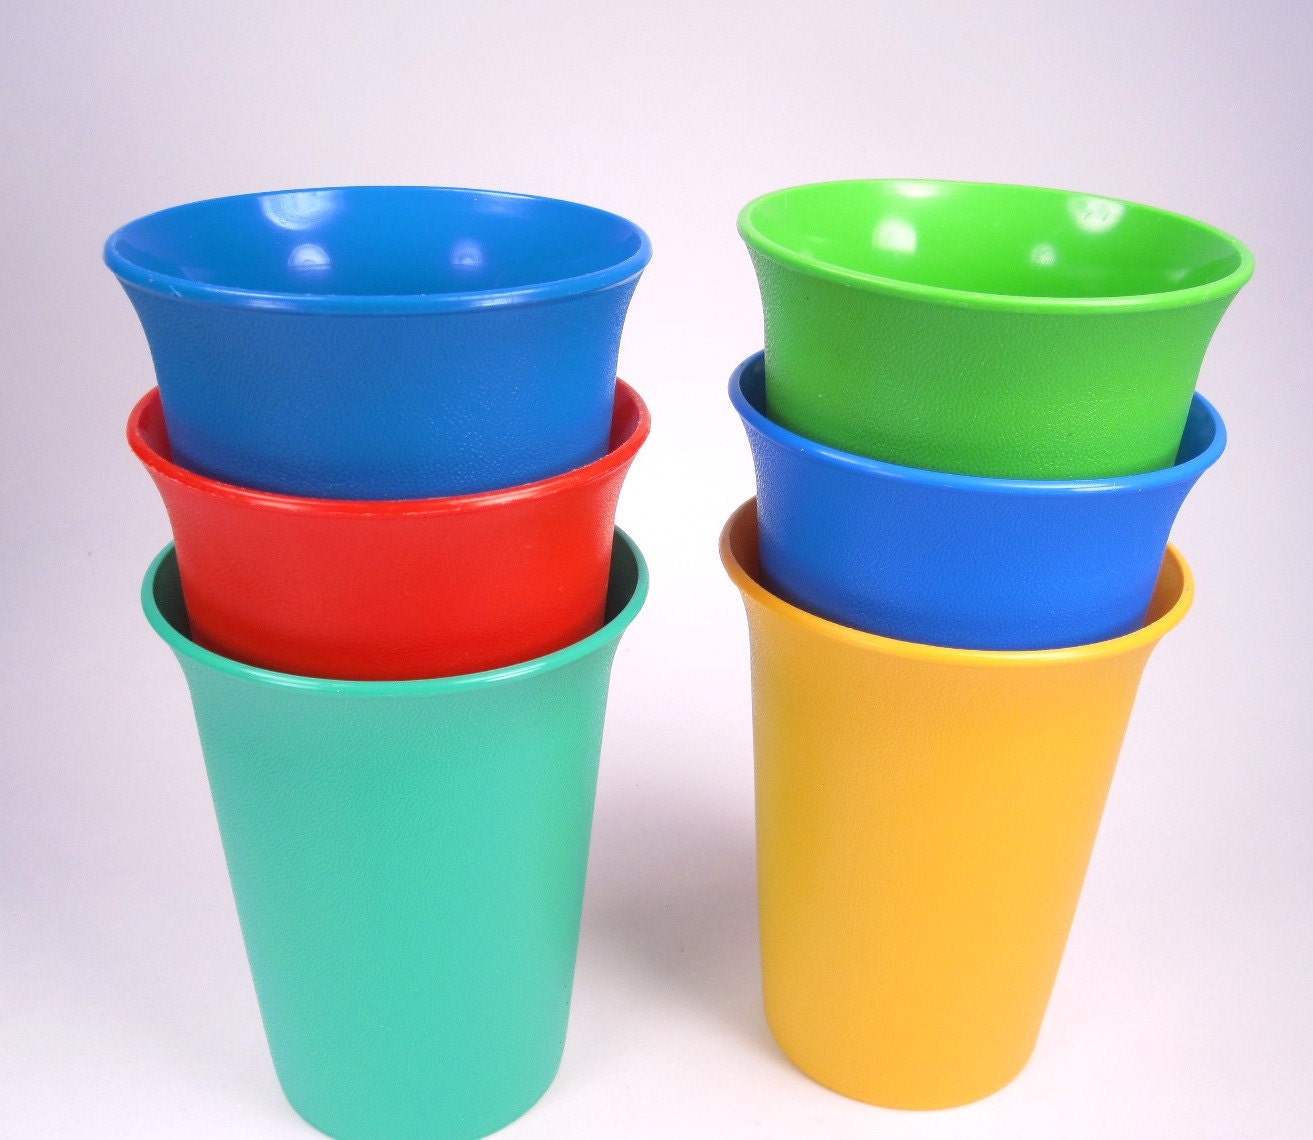 tumblers etsy of Cups Colorful Vintage Tumblers Picnic Set Tupperware